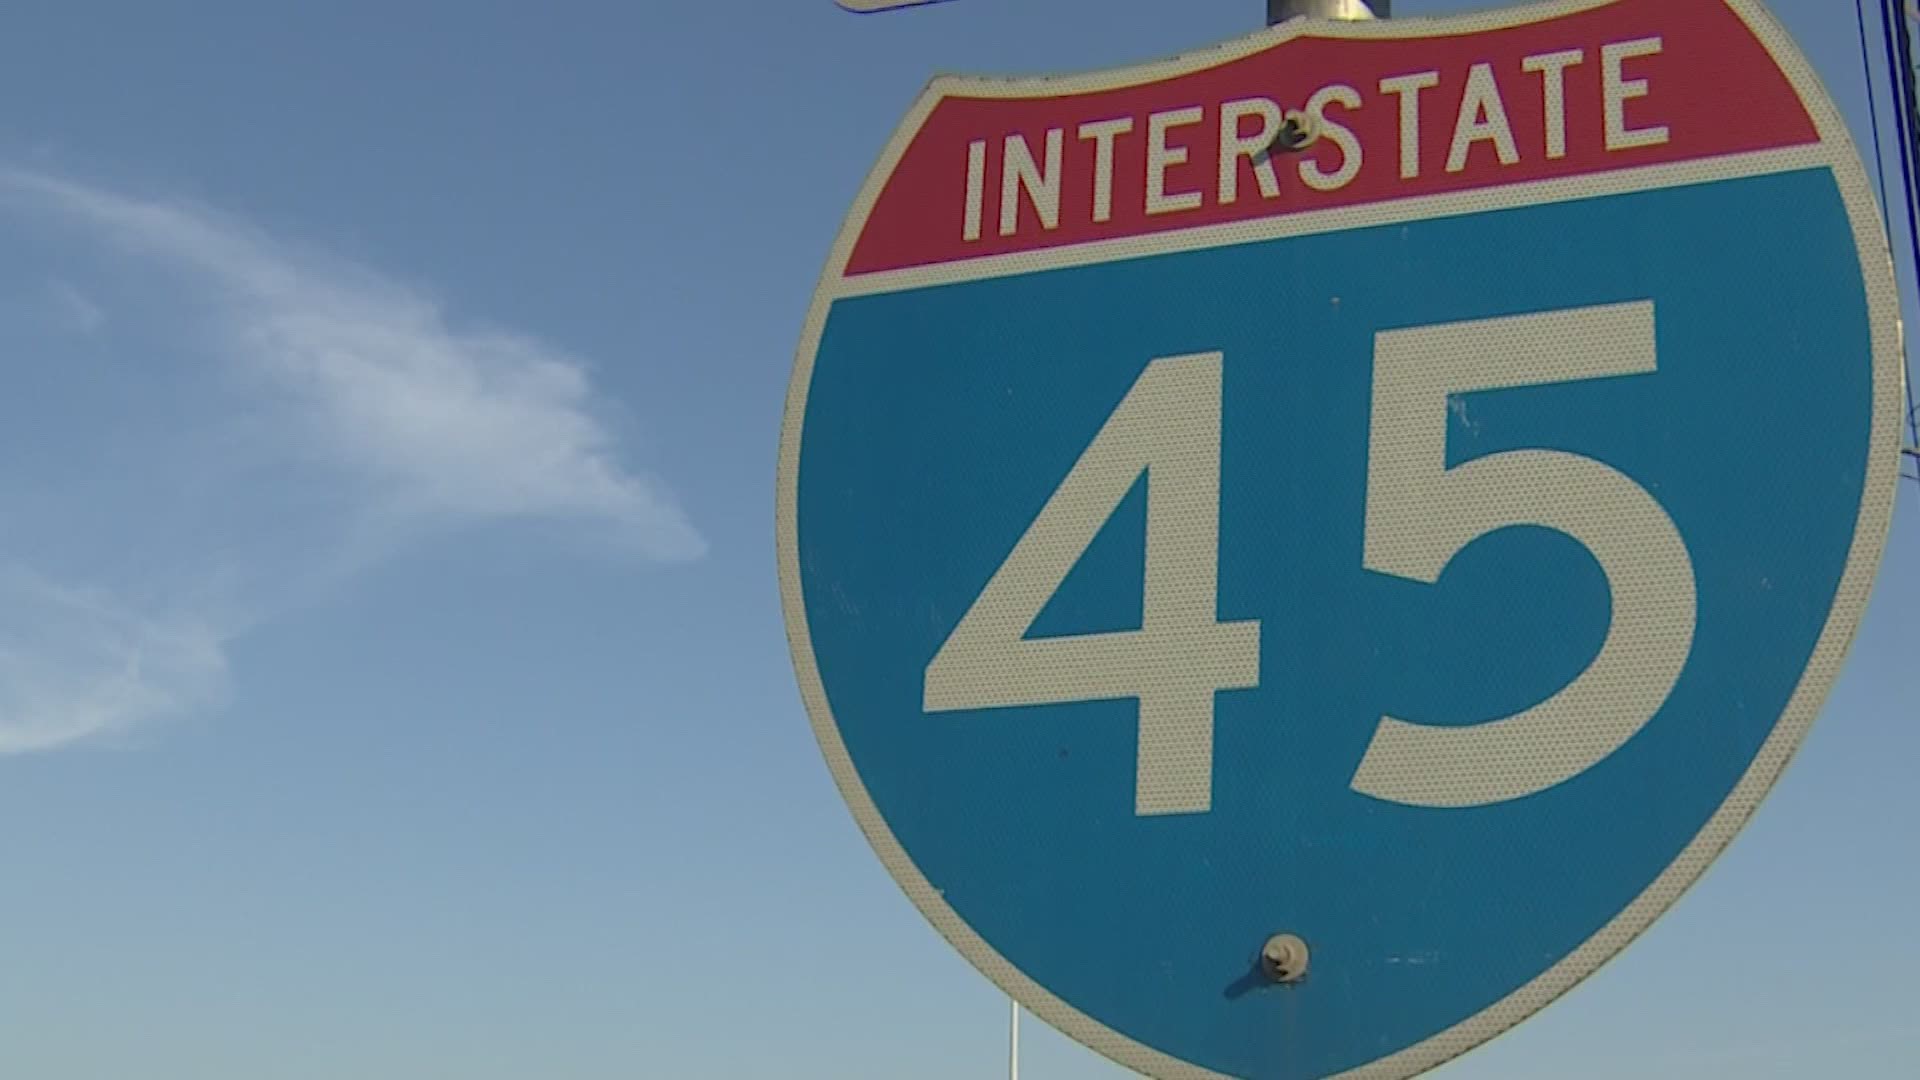 The data compiled by Budget Direct found I-45 averages 56.5 fatal accidents for every 100 miles. In 2019, 73 people died on the stretch that runs through Houston.